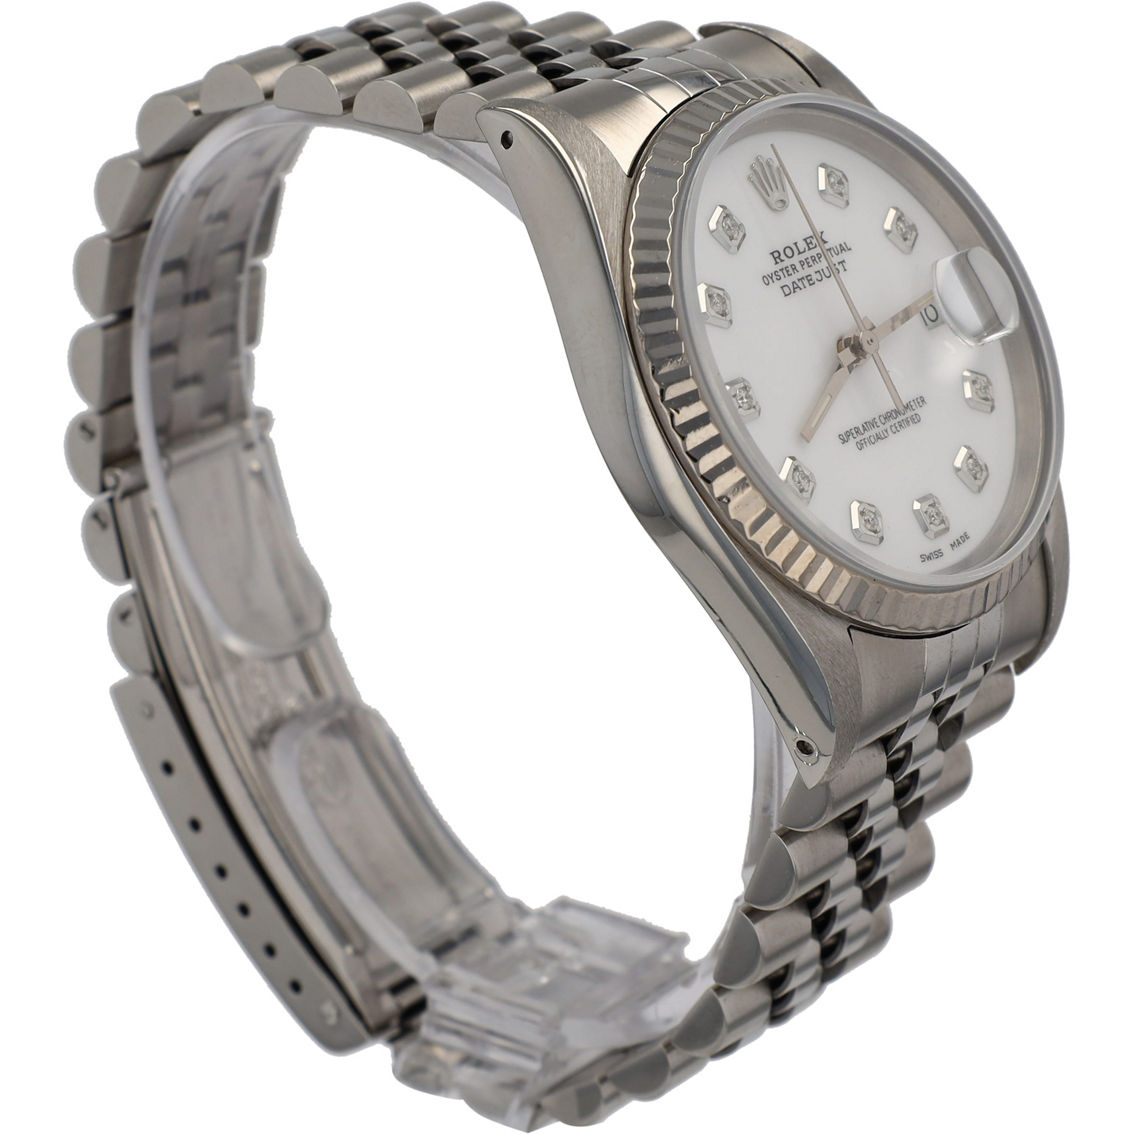 Rolex Men's Datejust Watch WLROLEX:OE74 (Pre-Owned) - Image 5 of 6